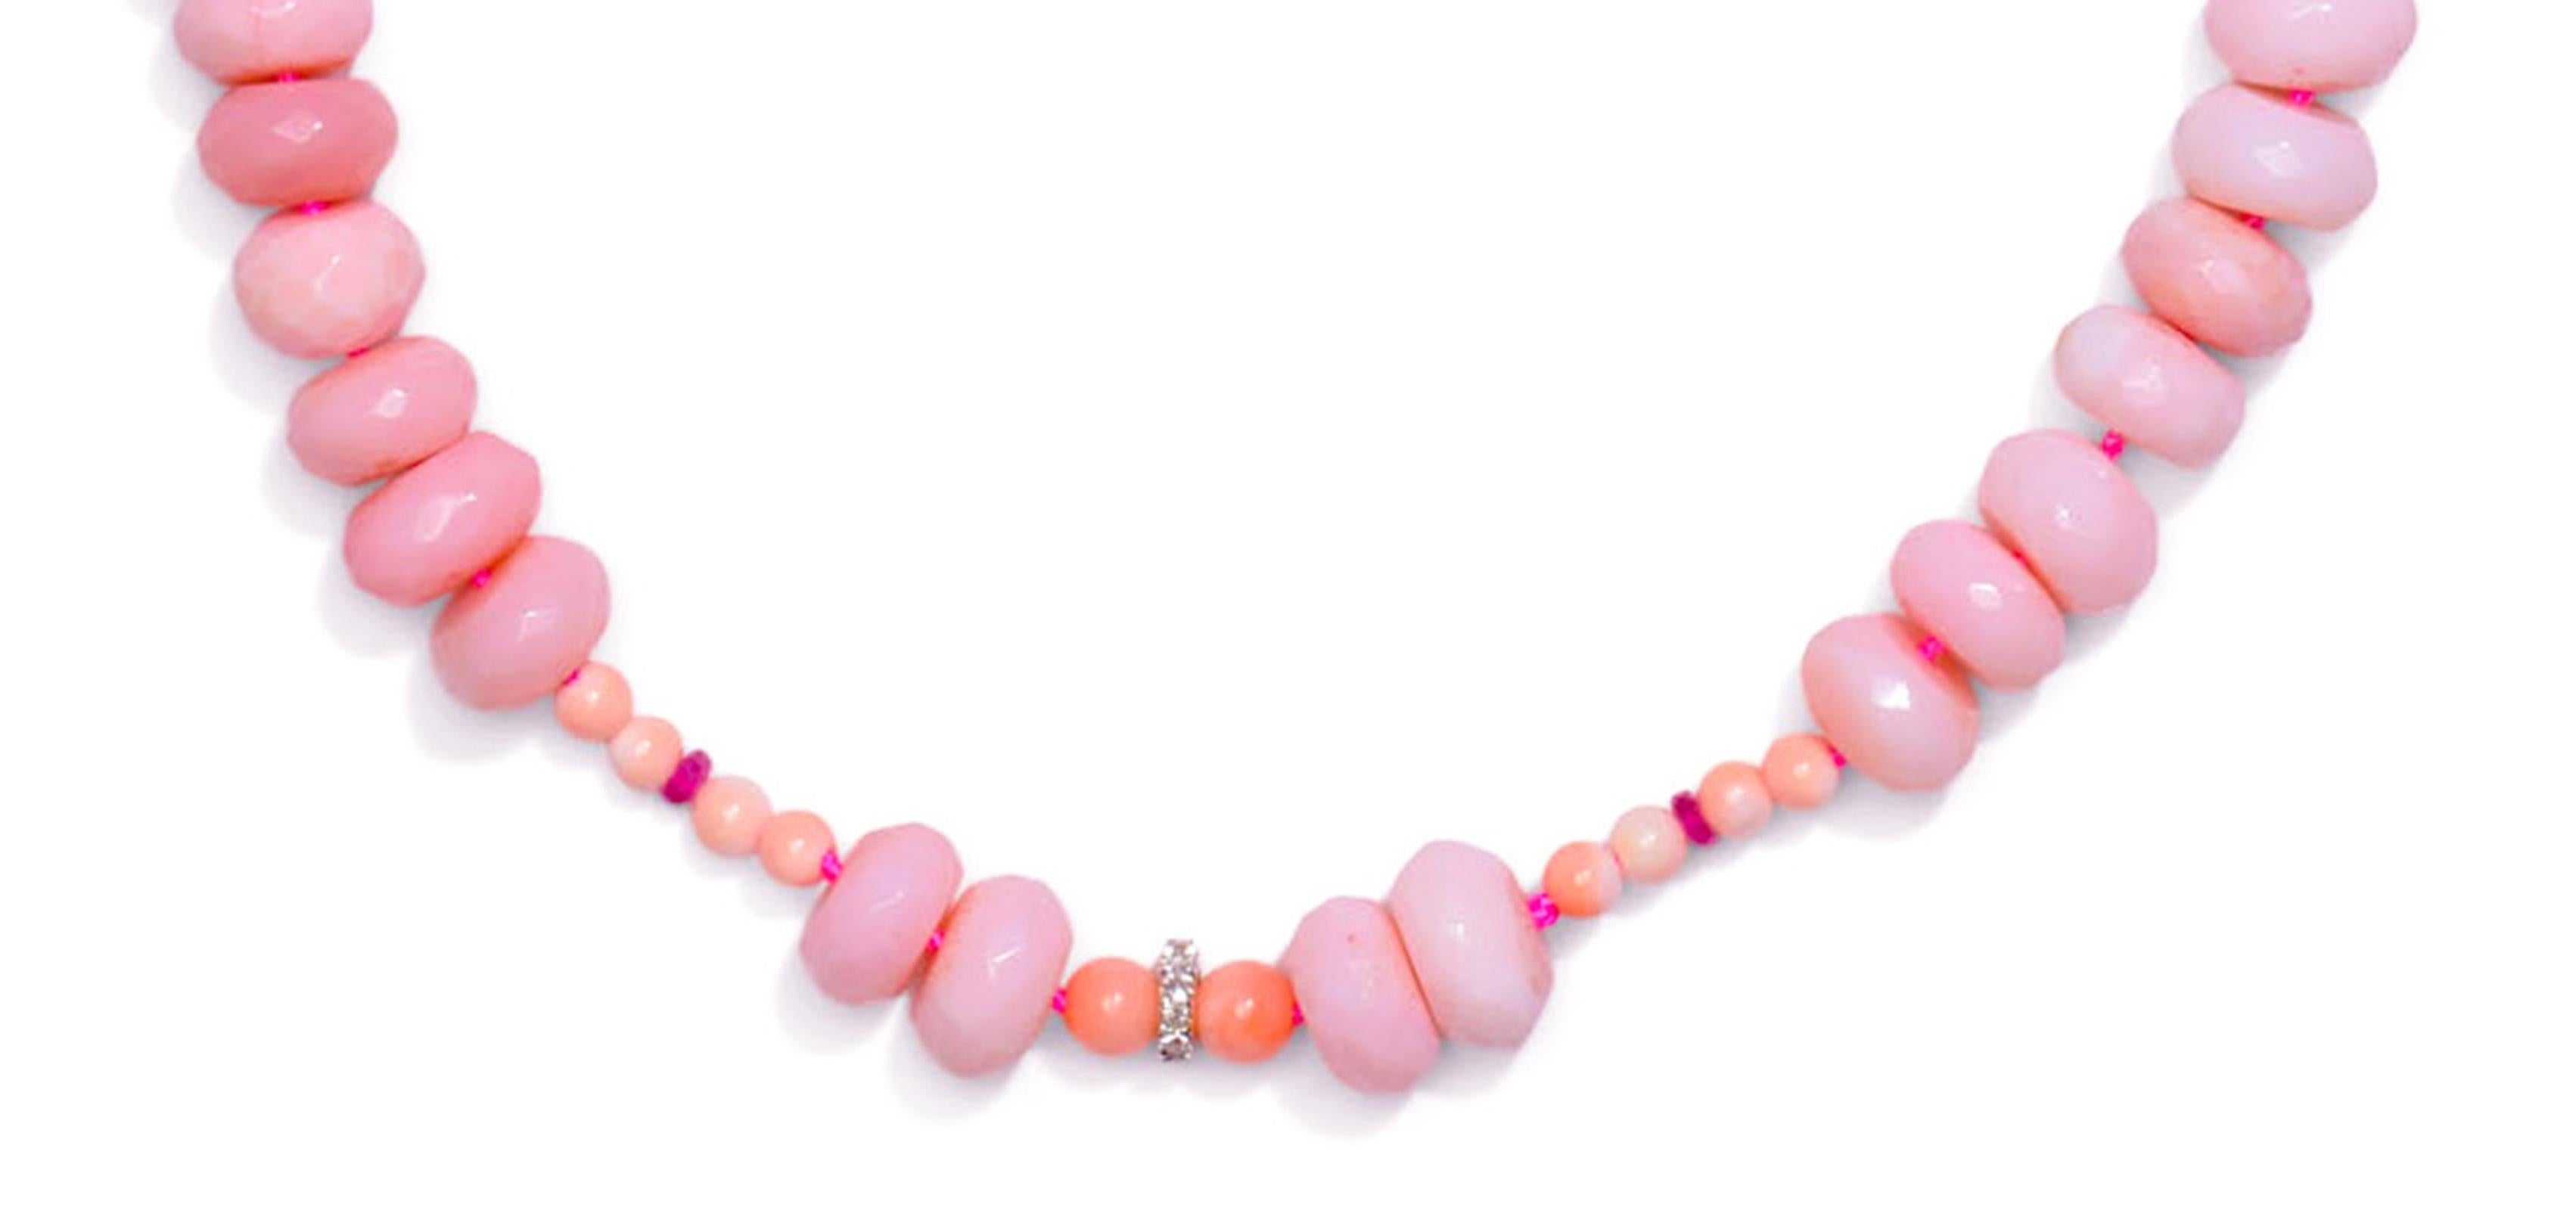 Pink Peruvian Opal Necklace encruched with diamonds, pink sapphires and angel skin corals. Methiciously hand knotted on hot pink silk thread.
The opals are hand carved and give a sparkling effect. The color of this beauty is soft blush pink (blossom